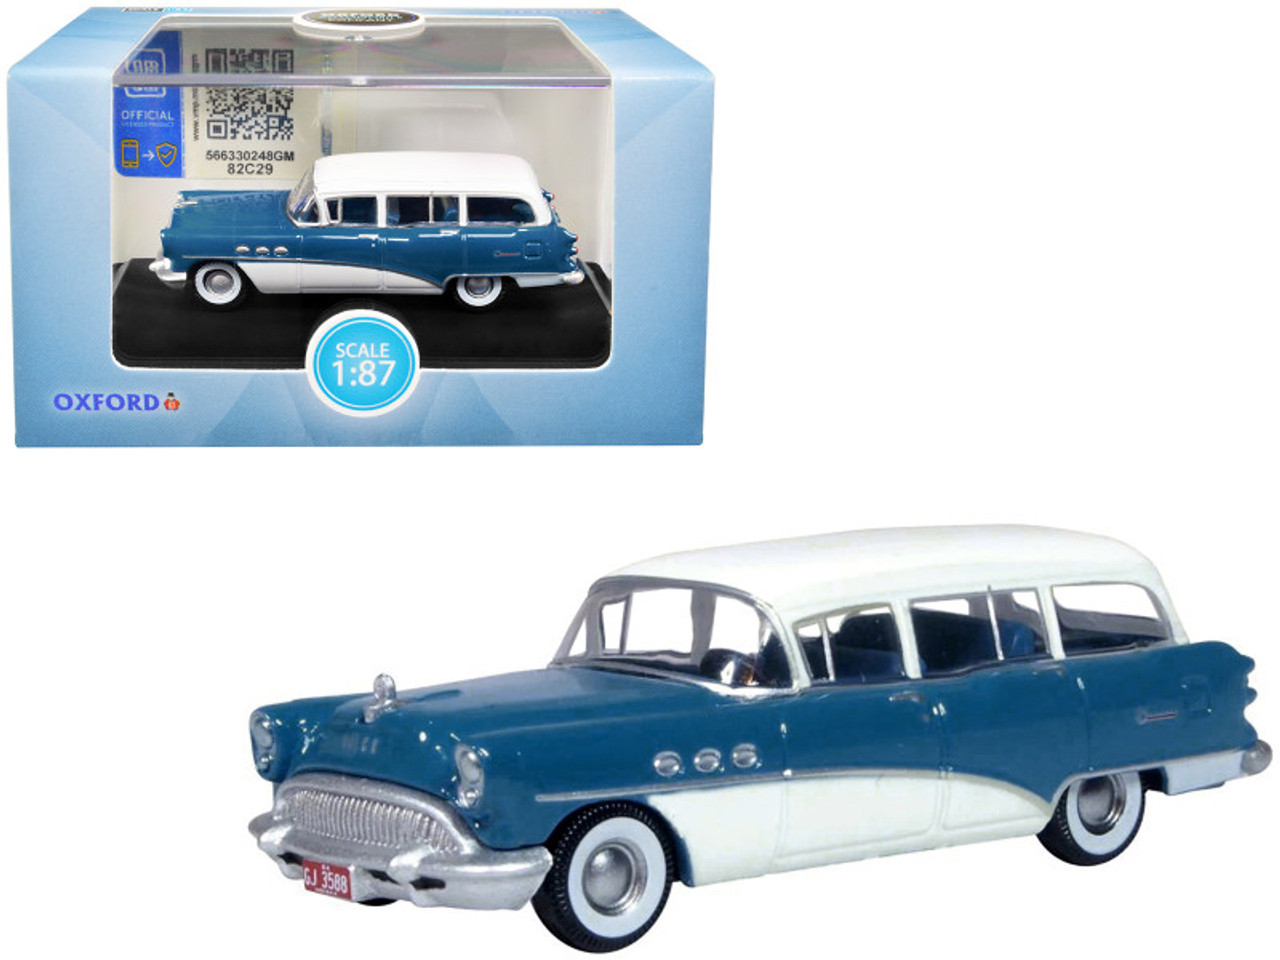 Buick Century Estate Wagon Ranier Blue and Arctic White 1/87 (HO) Scale Diecast Model Car by Oxford Diecast